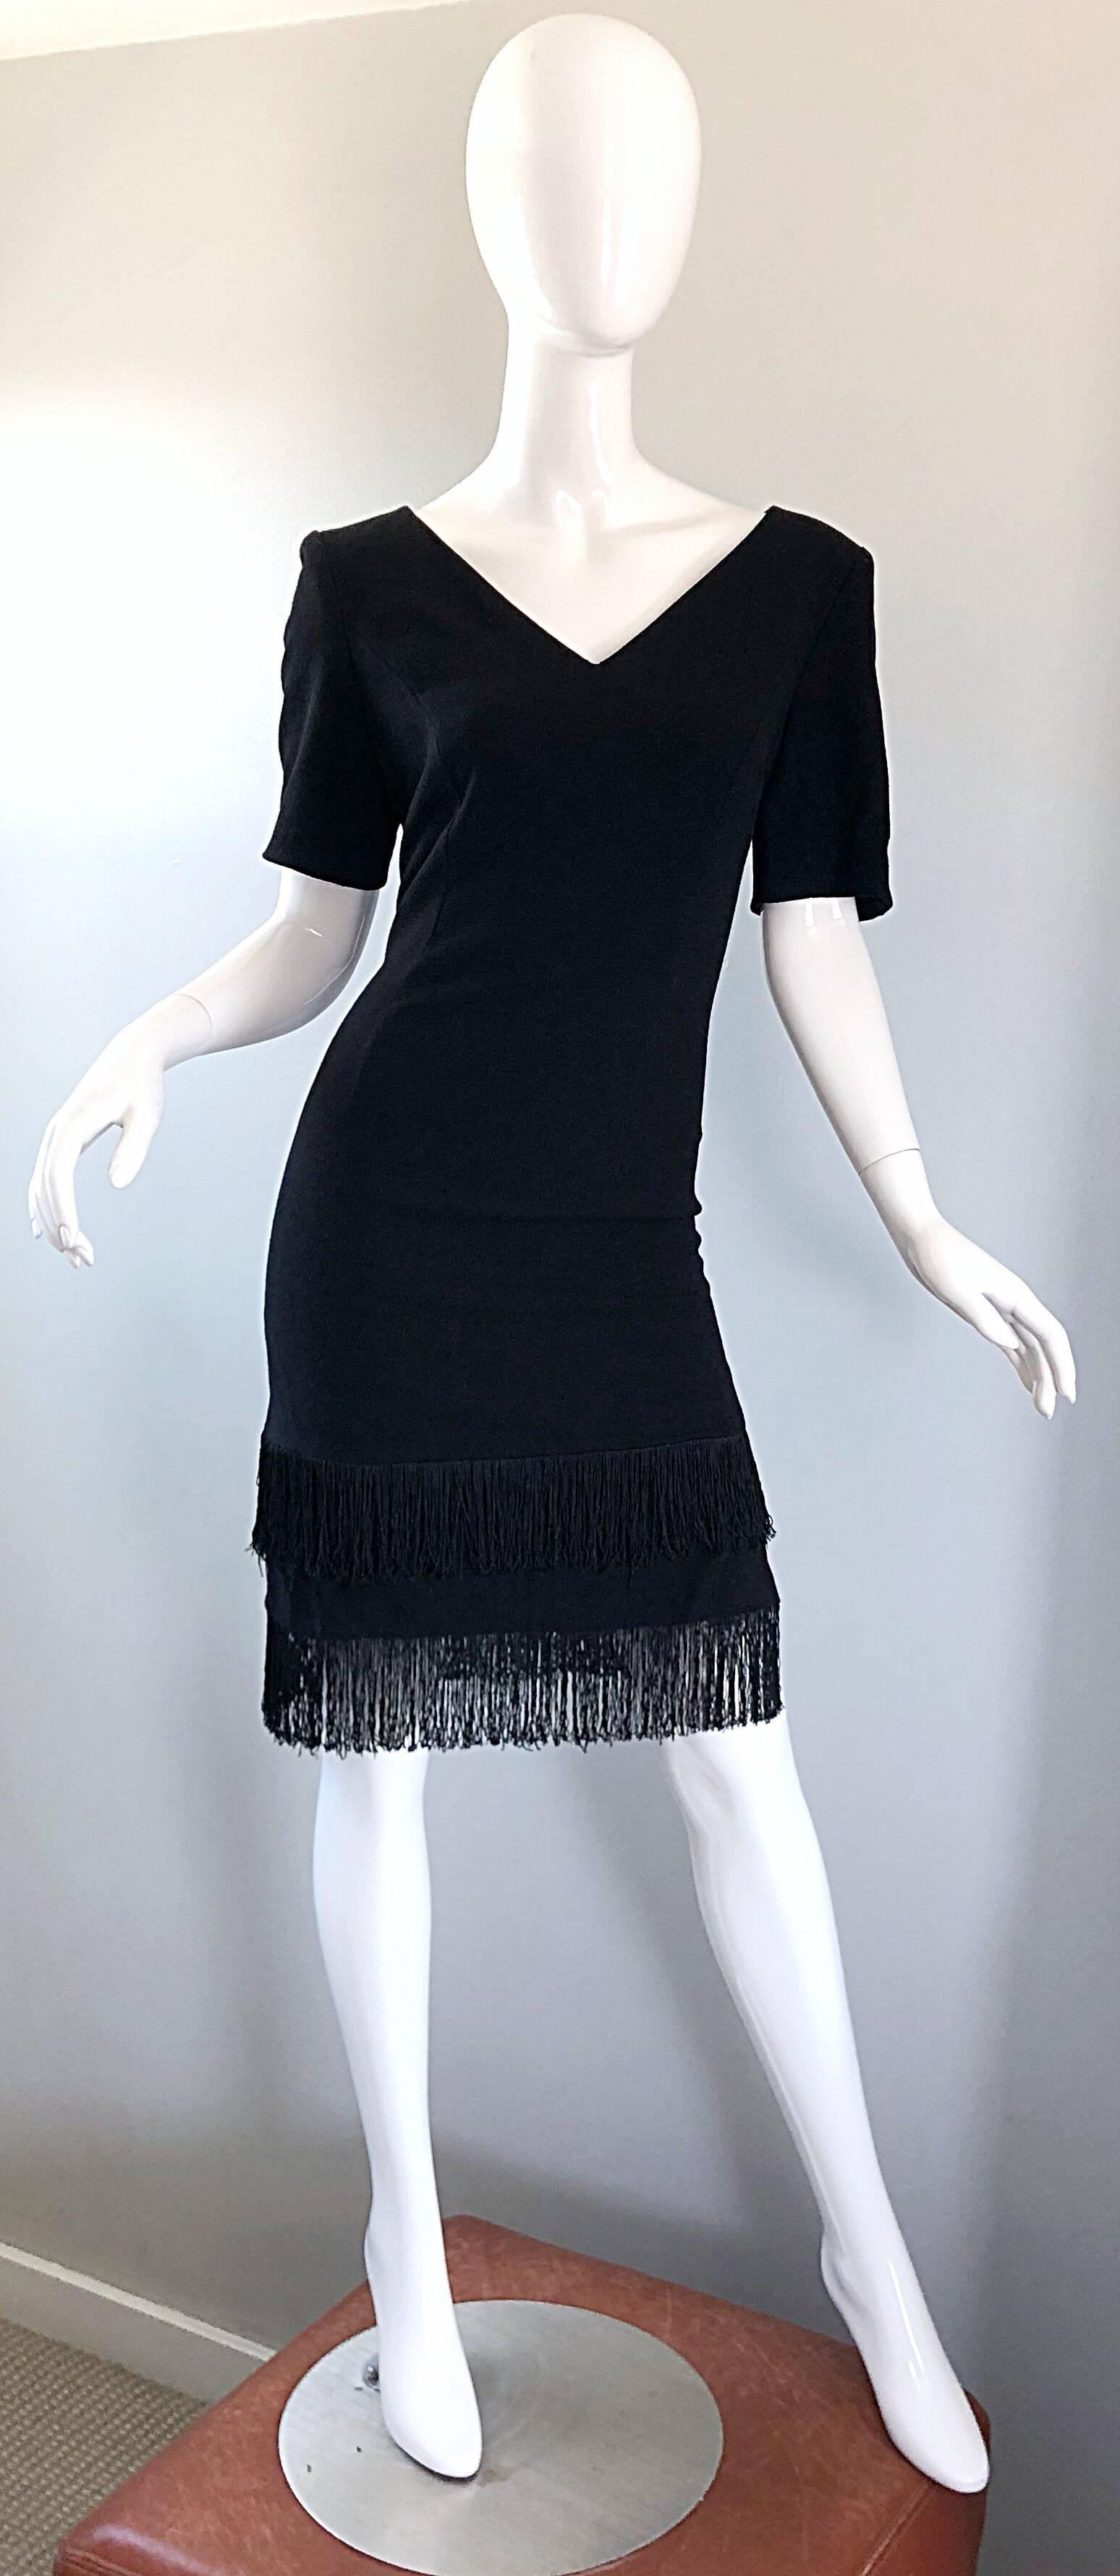 Amazing early 90s does 20s ESCADA by MARGARETHA LEY black flapper inspired virgin wool fringe dress! Features a tailored bodice with a v-neck and short sleeves. Two tiers of black fringe across the bottom hem. Hidden zipper up the back with